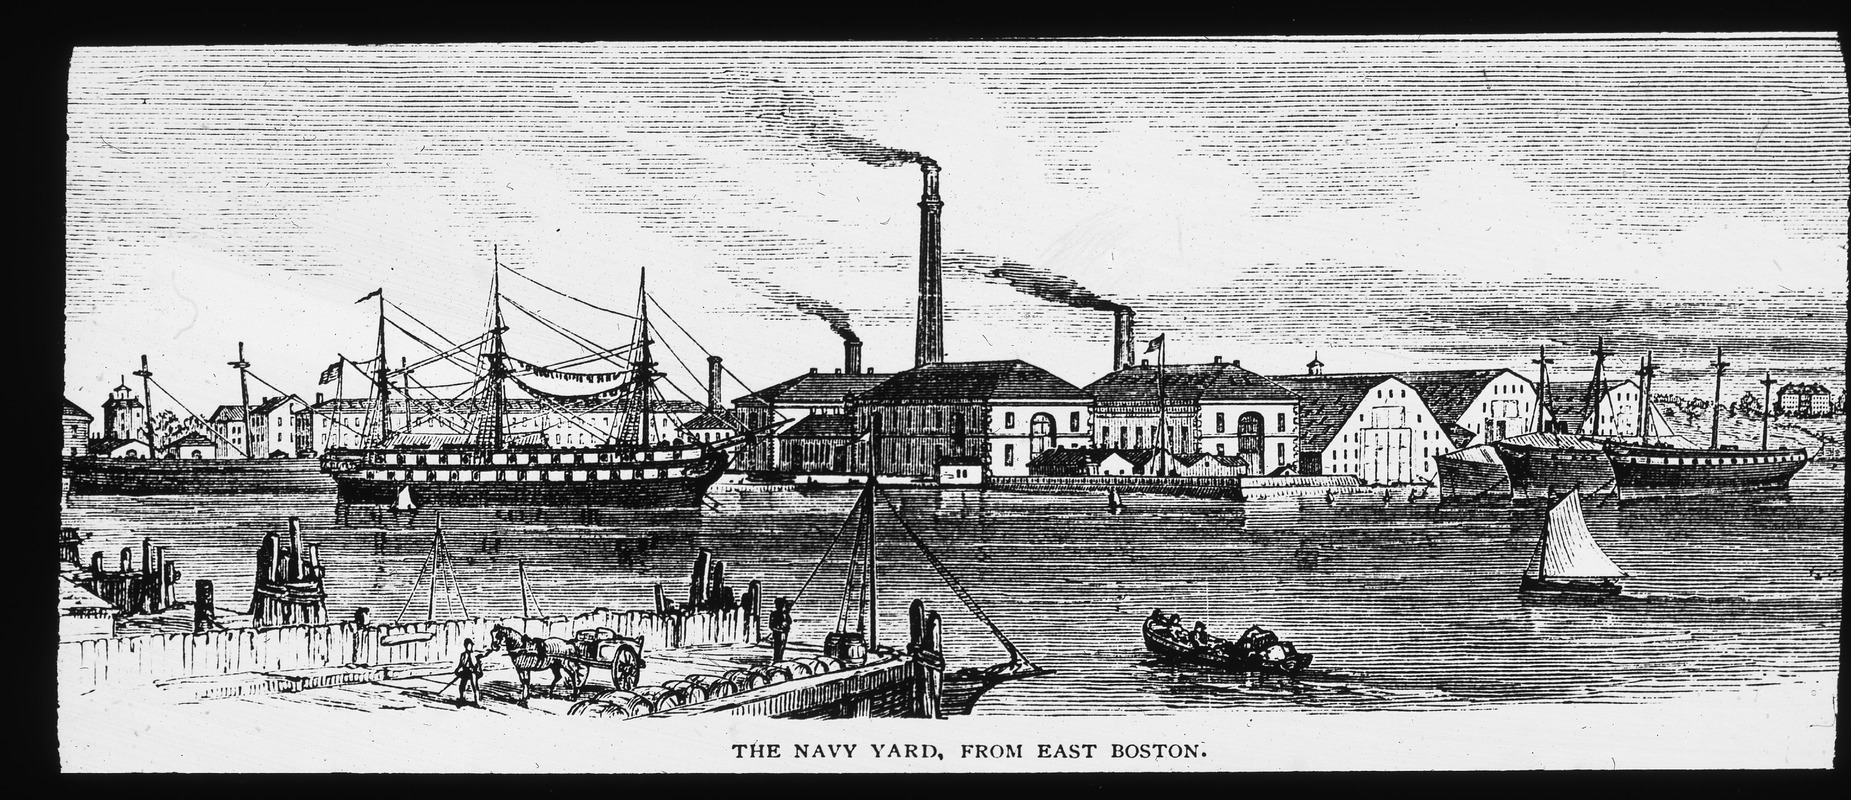 Navy Yard from North End of Boston about 1870